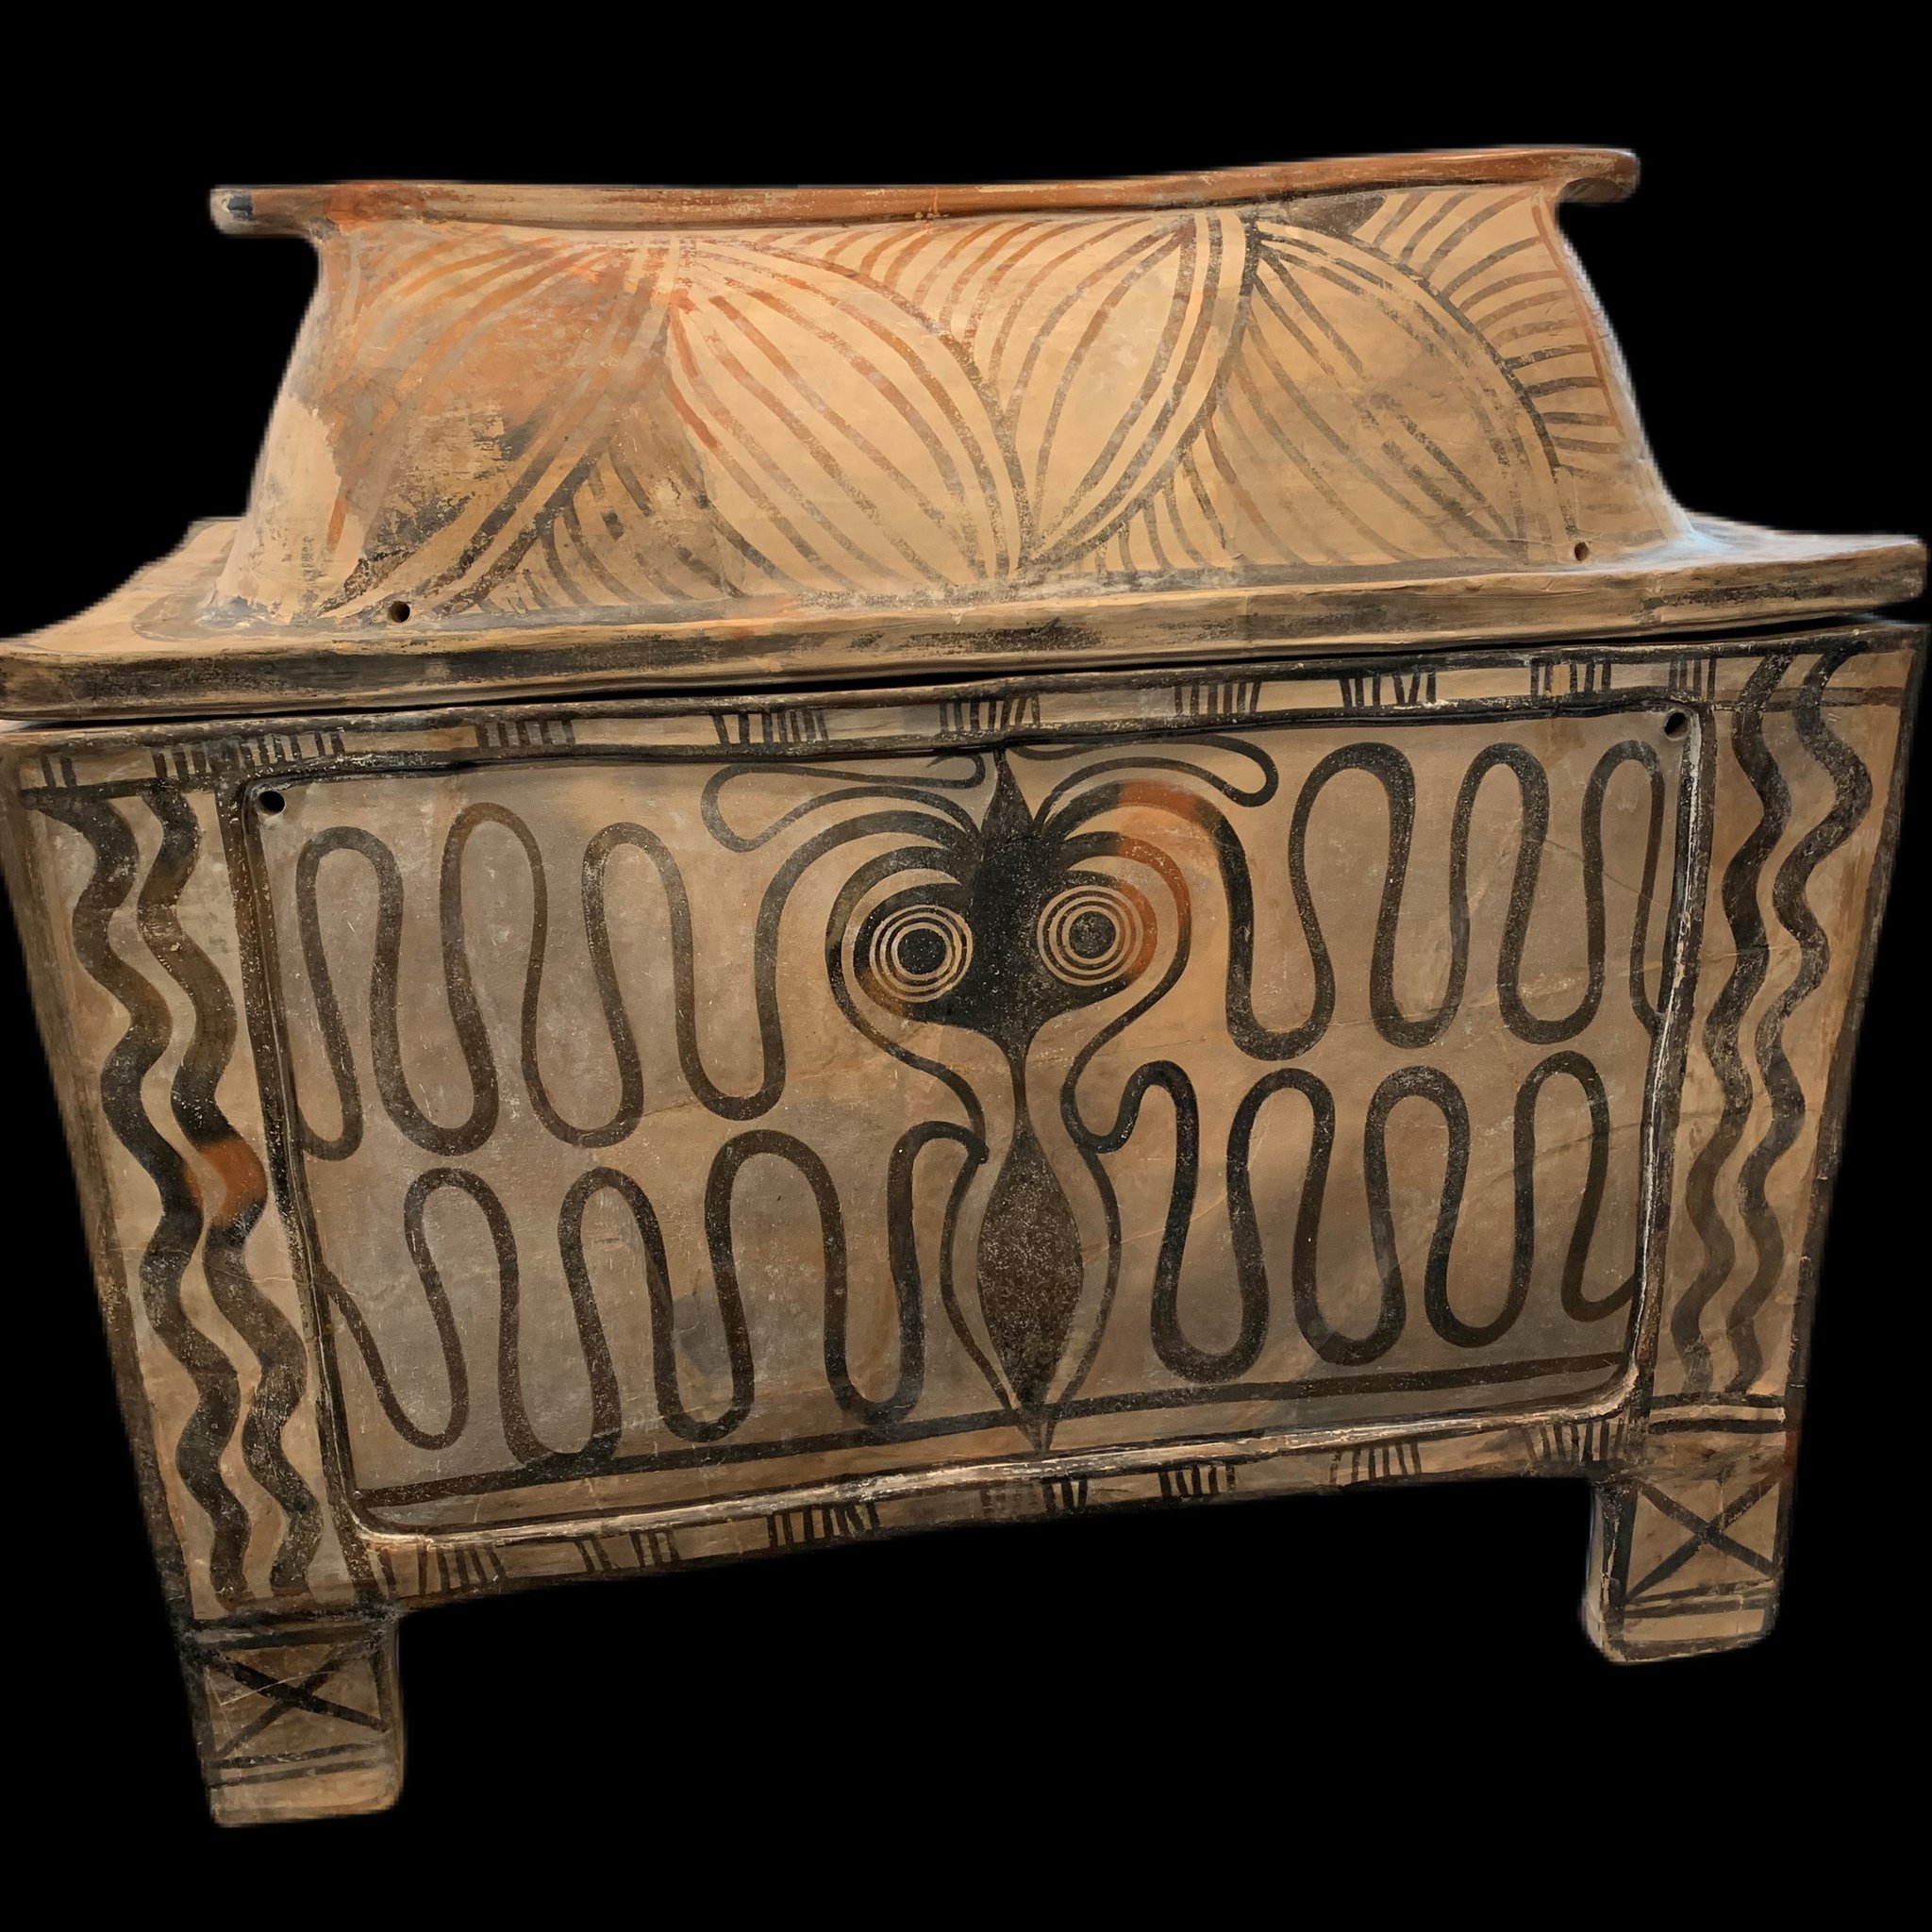 The Larnax, a small chest for human remains from Greek Island of Crete that dates between 1400-1200BC